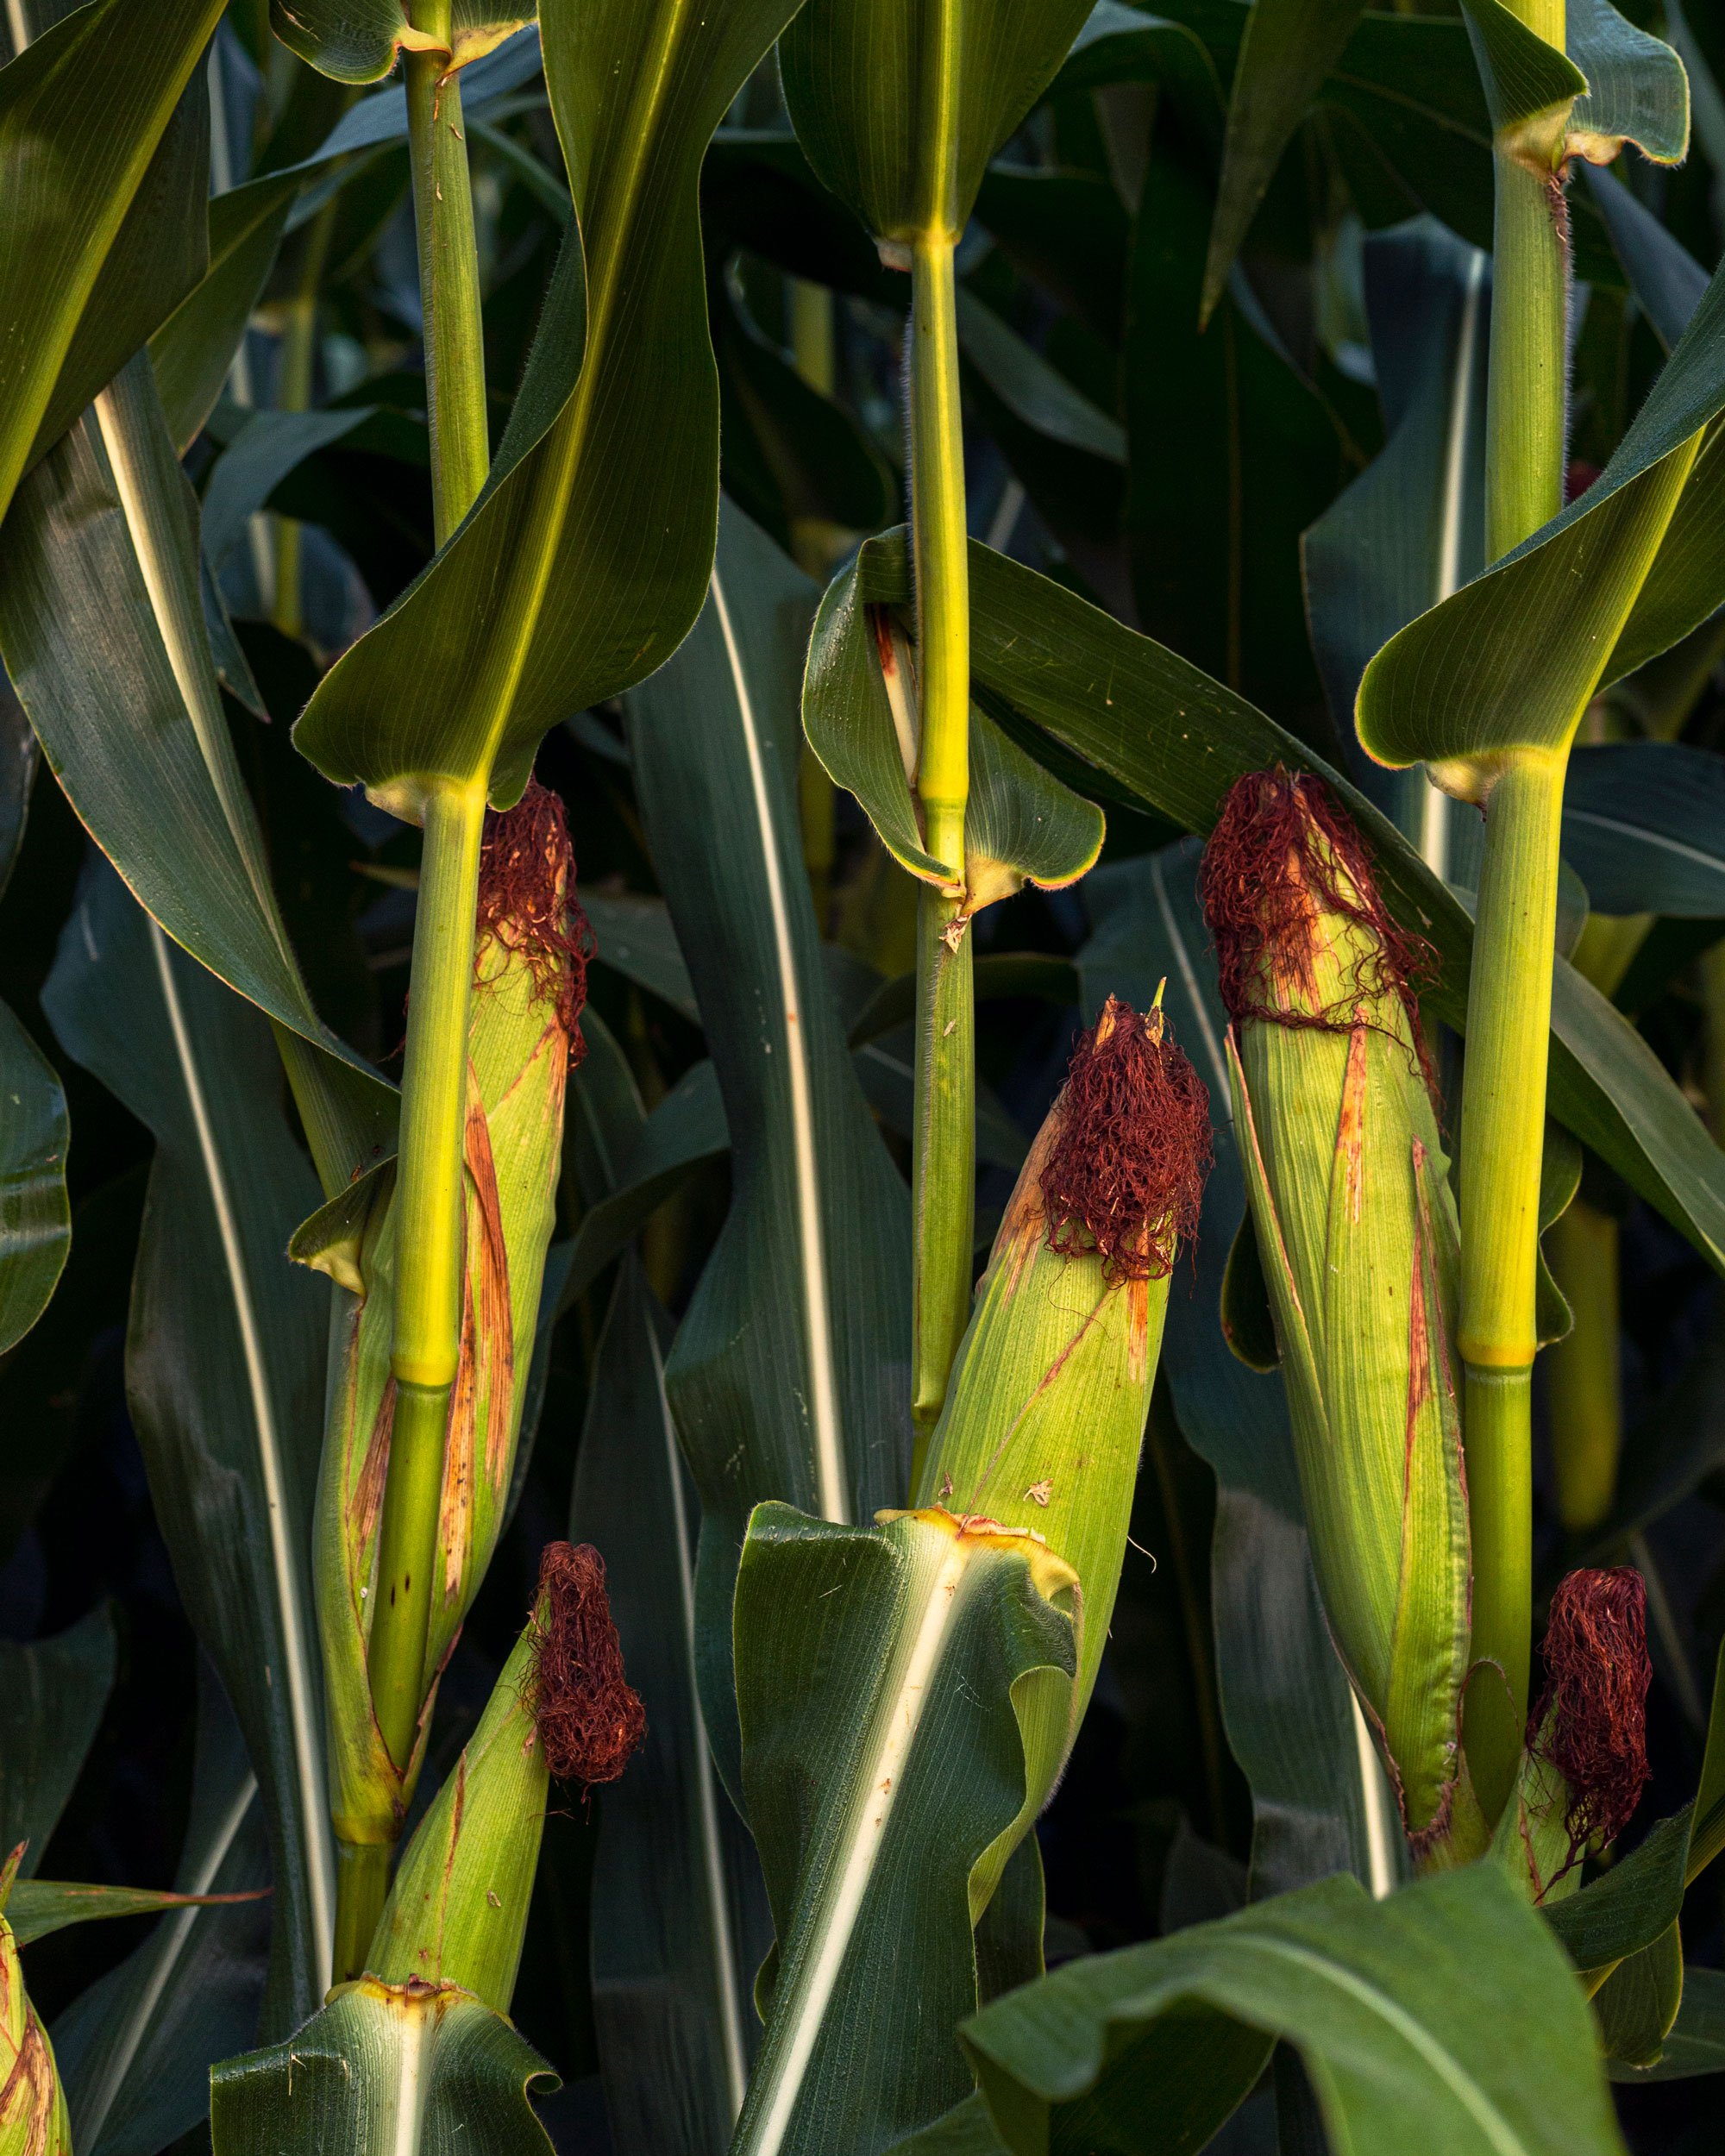 Corn cobs in early morning light